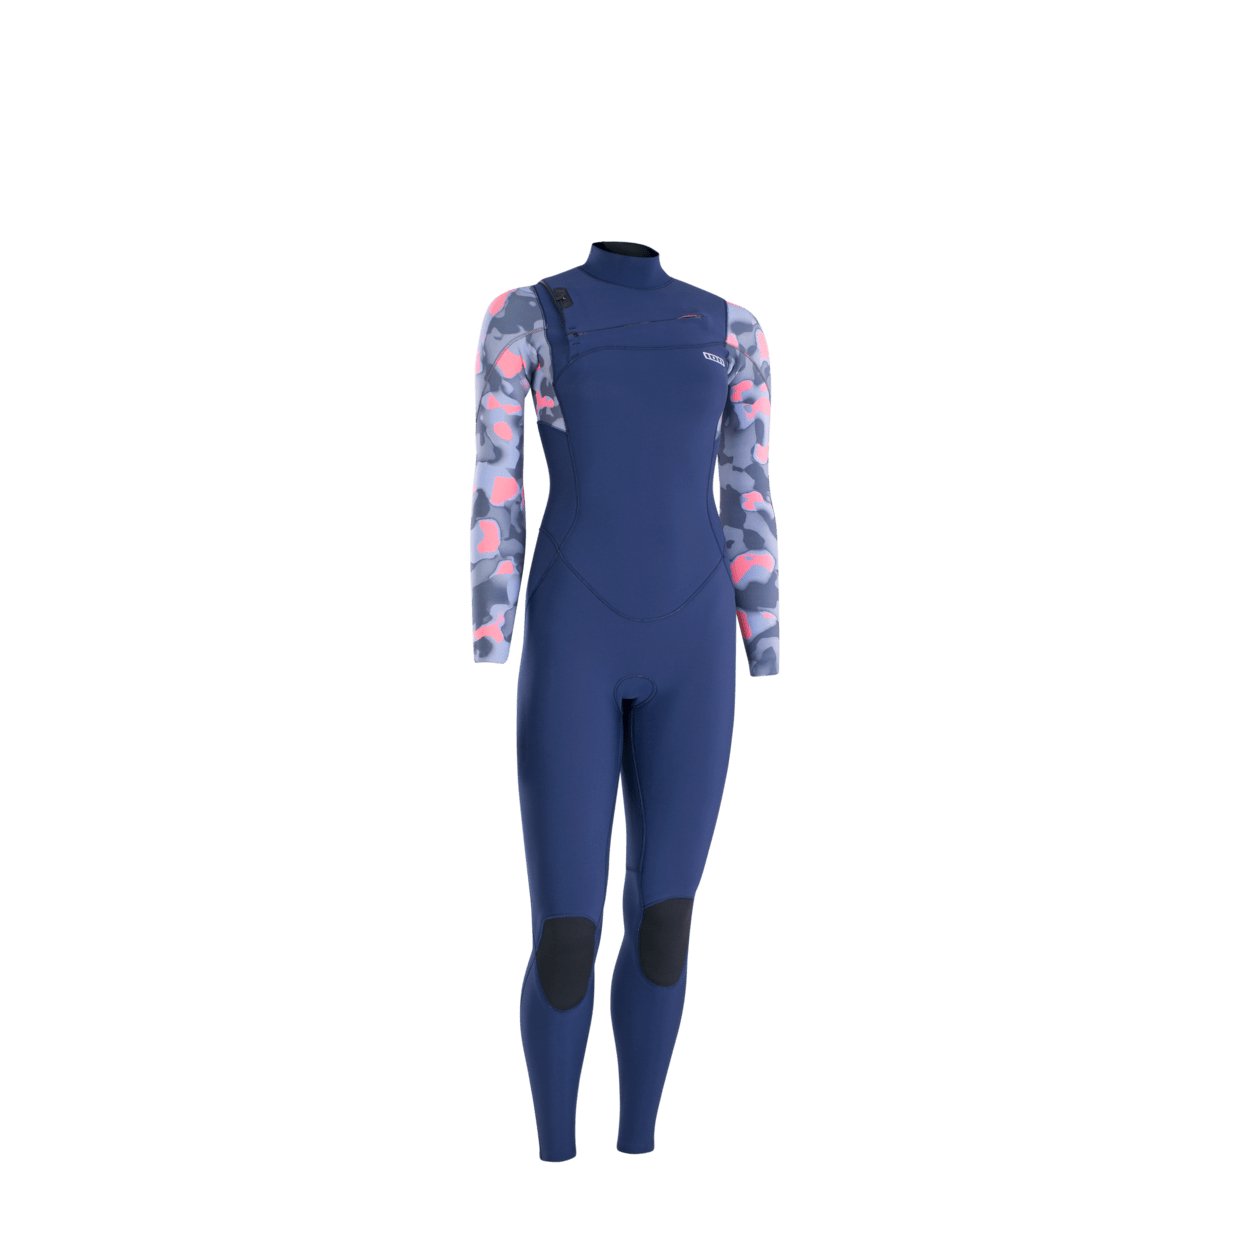 ION Women Wetsuit Amaze Amp 3/2 Front Zip 2023 - Worthing Watersports - 9010583057903 - Wetsuits - ION Water